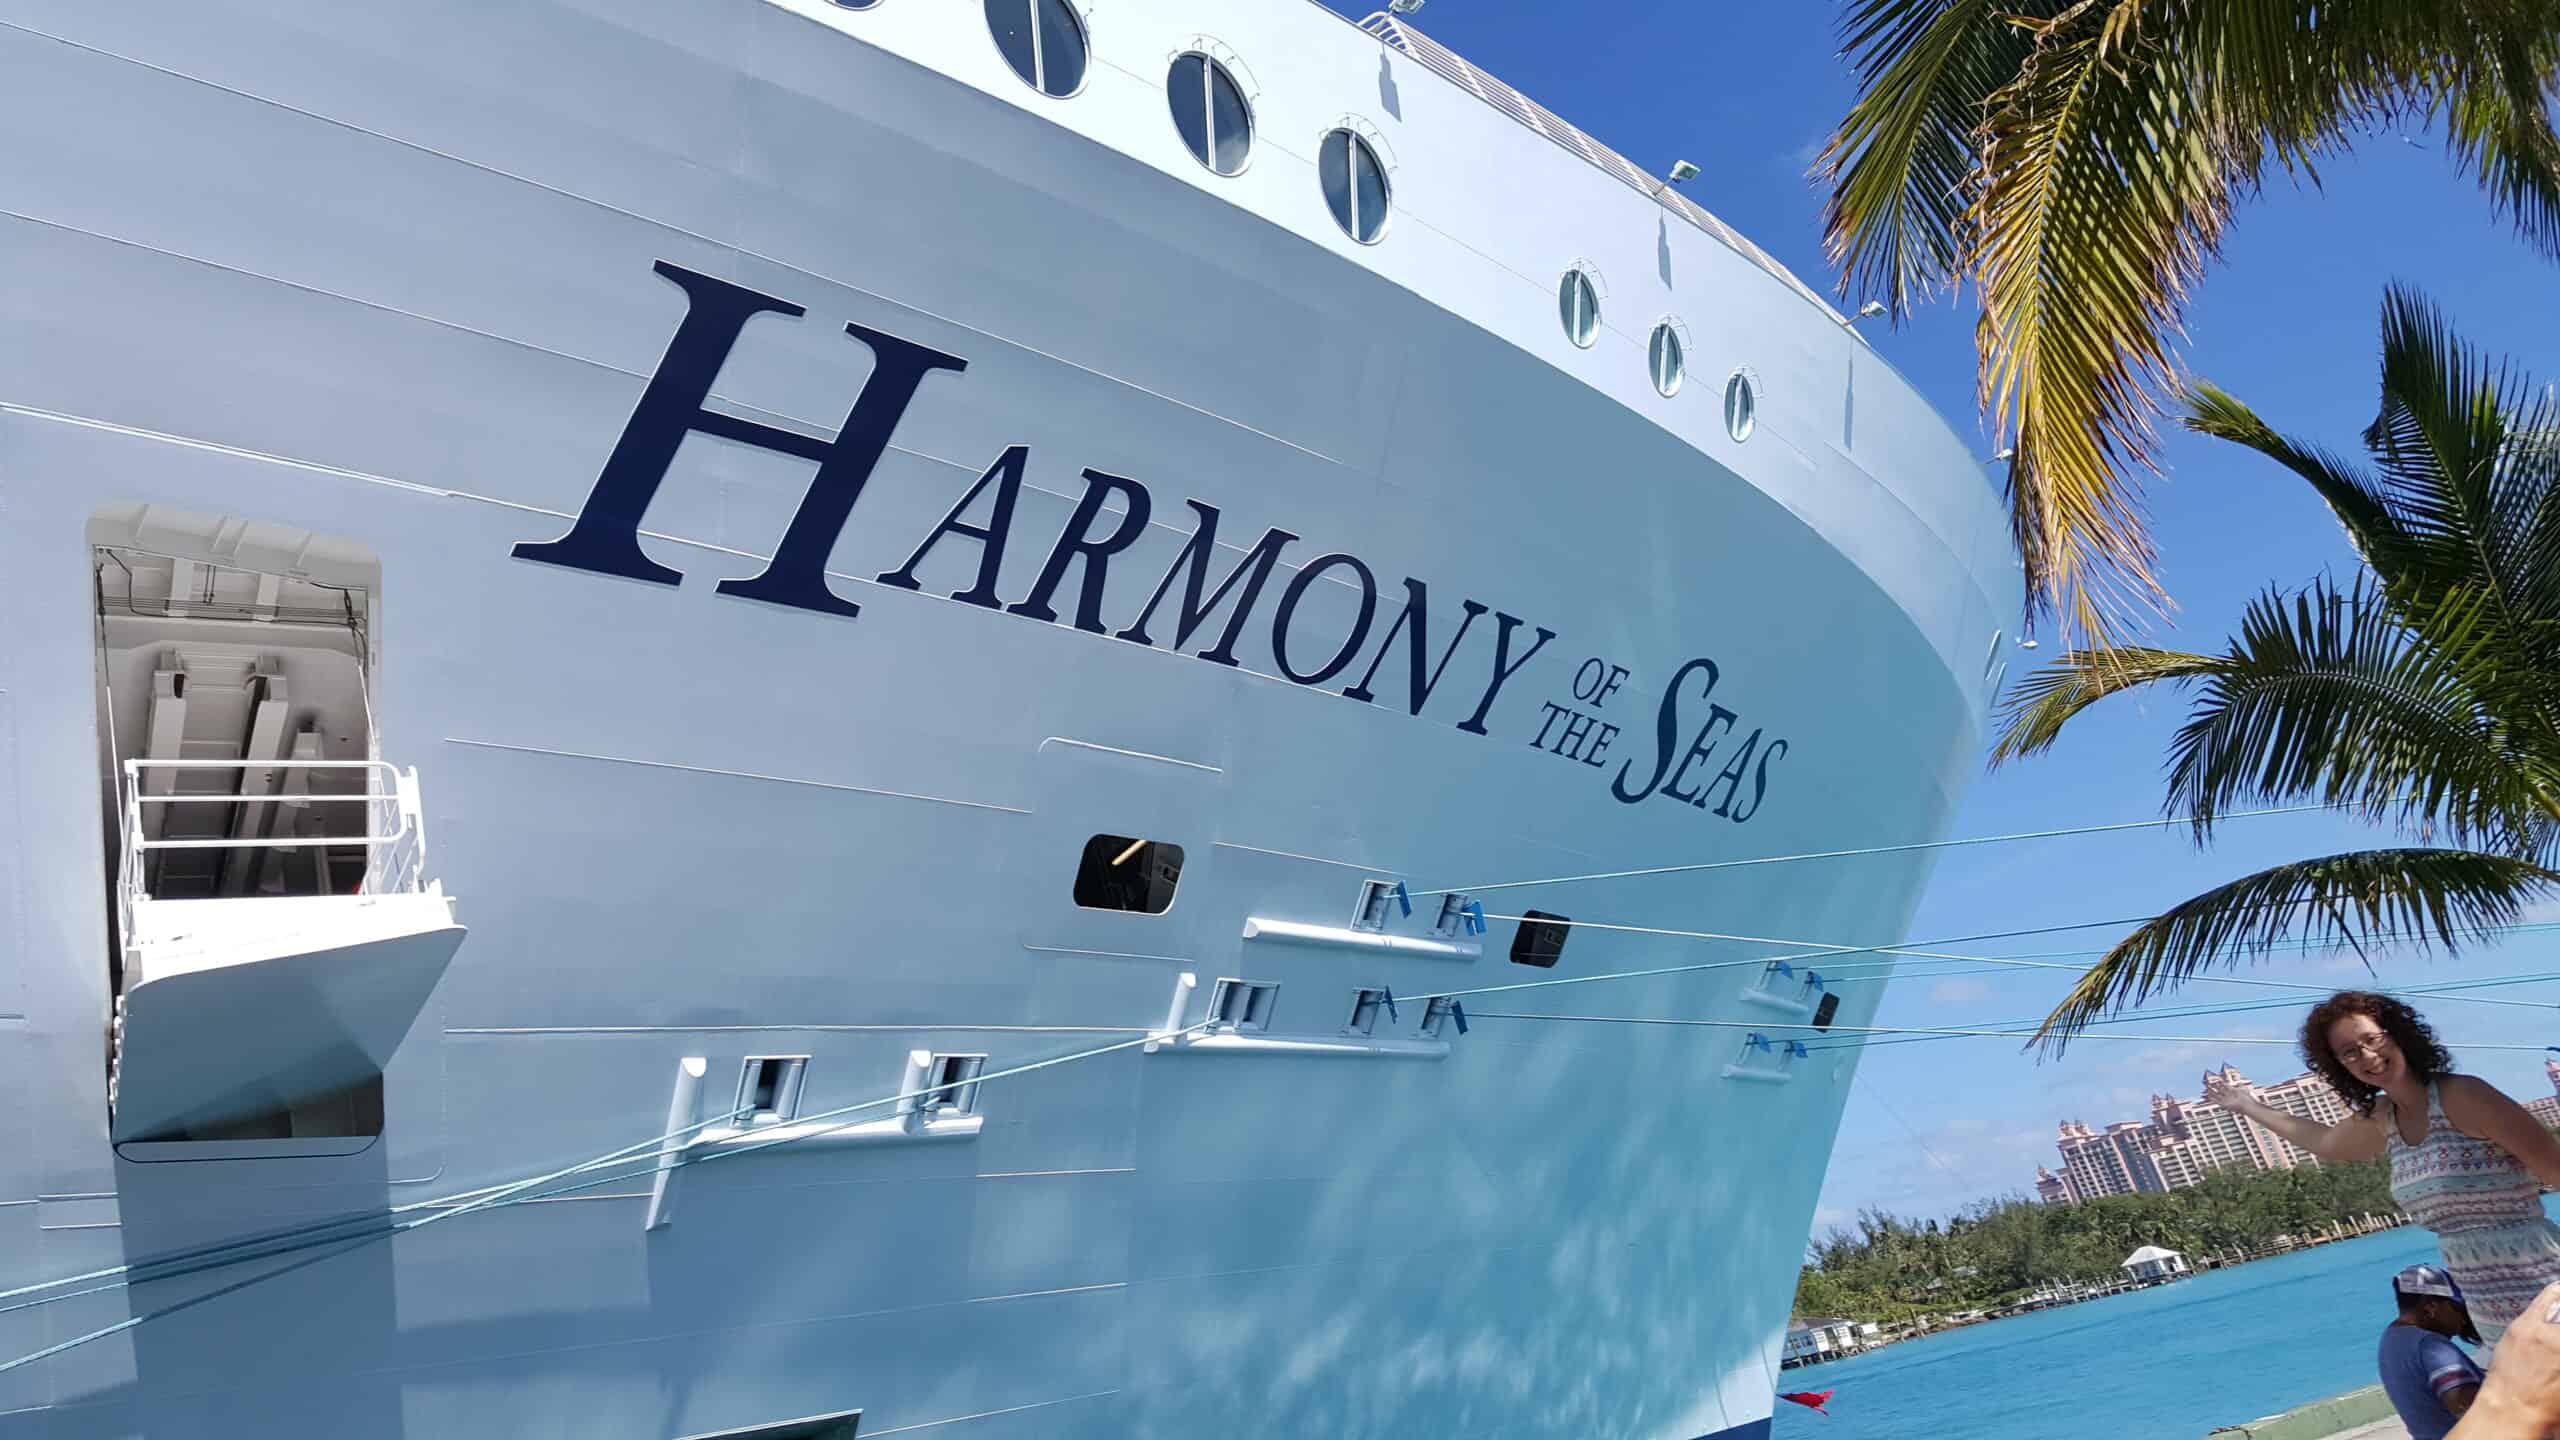 Tampa Bay Parenting Harmony of the Seas Review